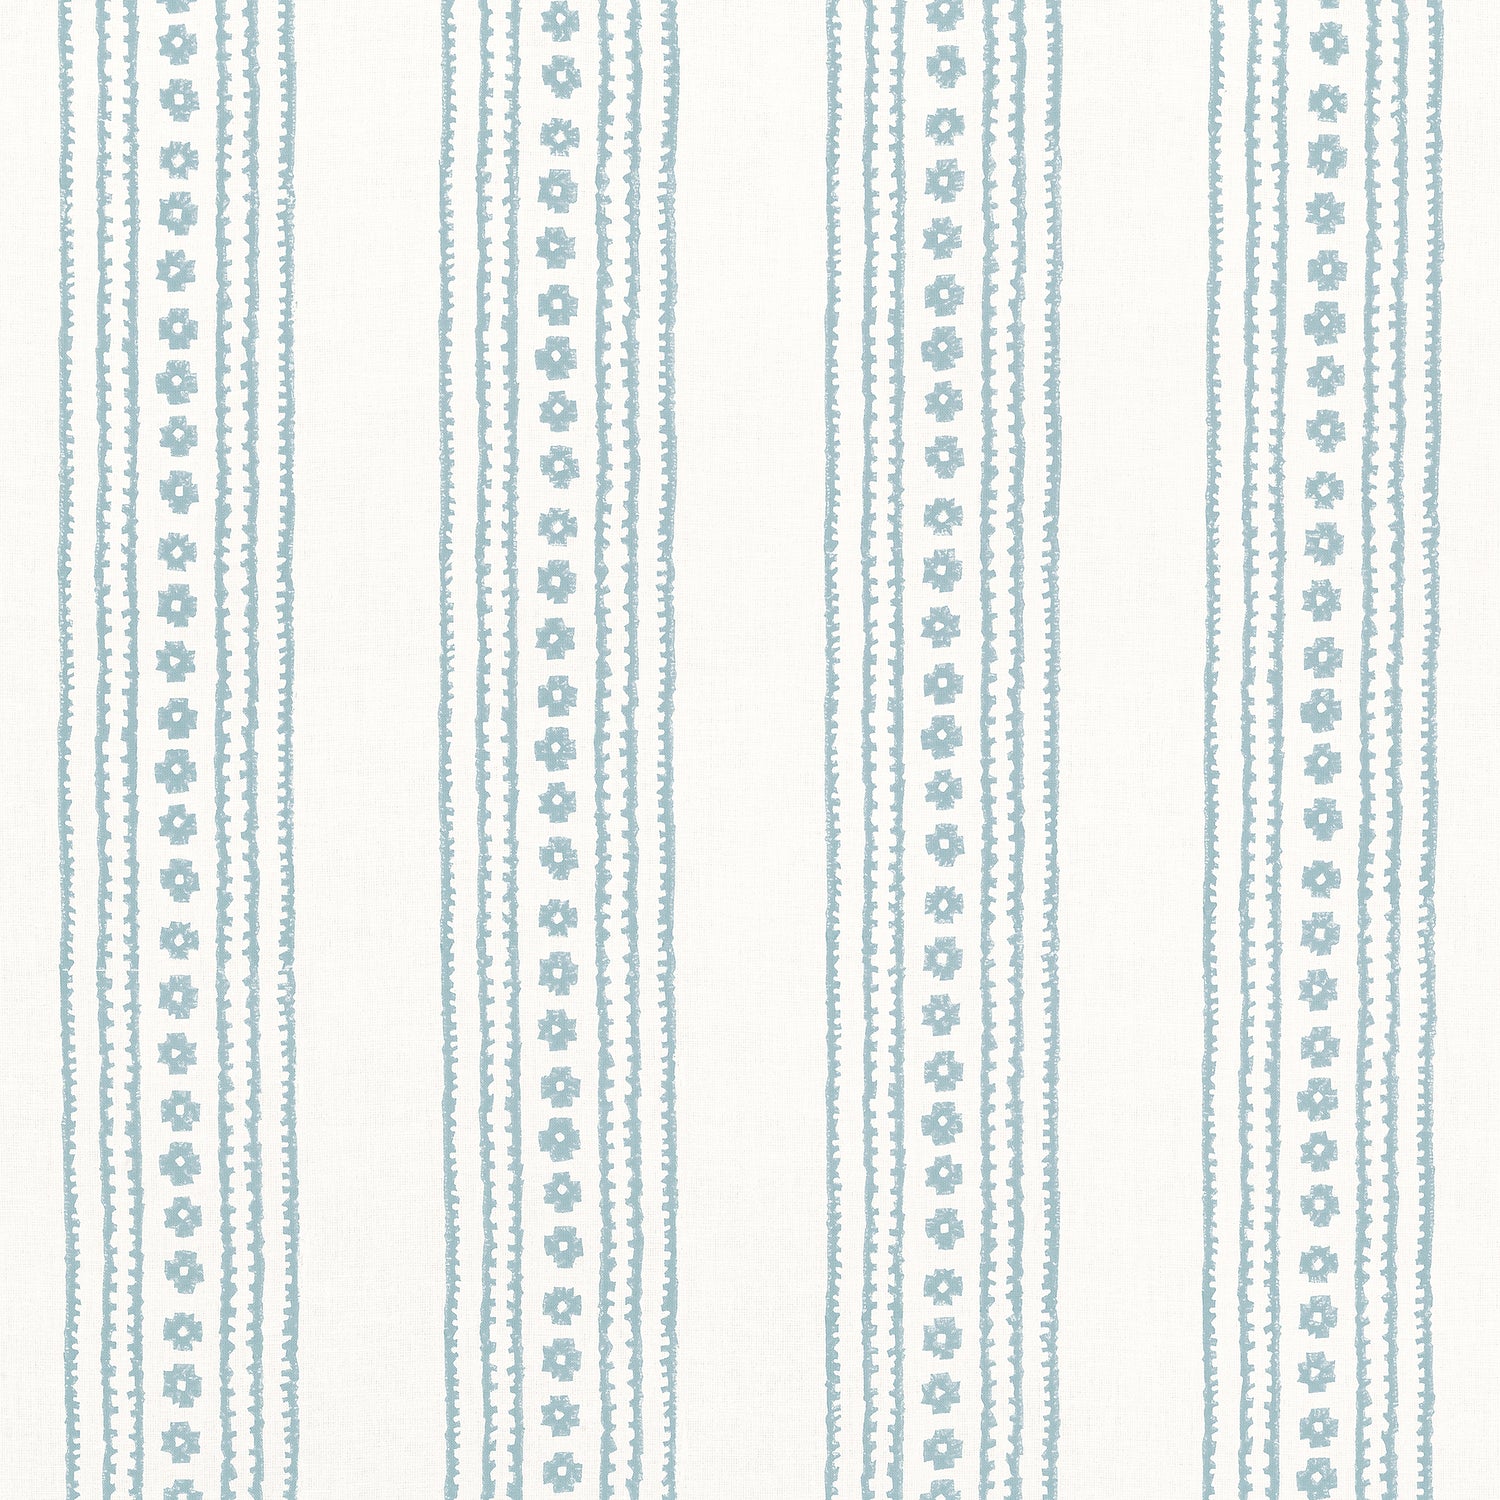 New Haven Stripe fabric in spa blue color - pattern number F910612 - by Thibaut in the Ceylon collection